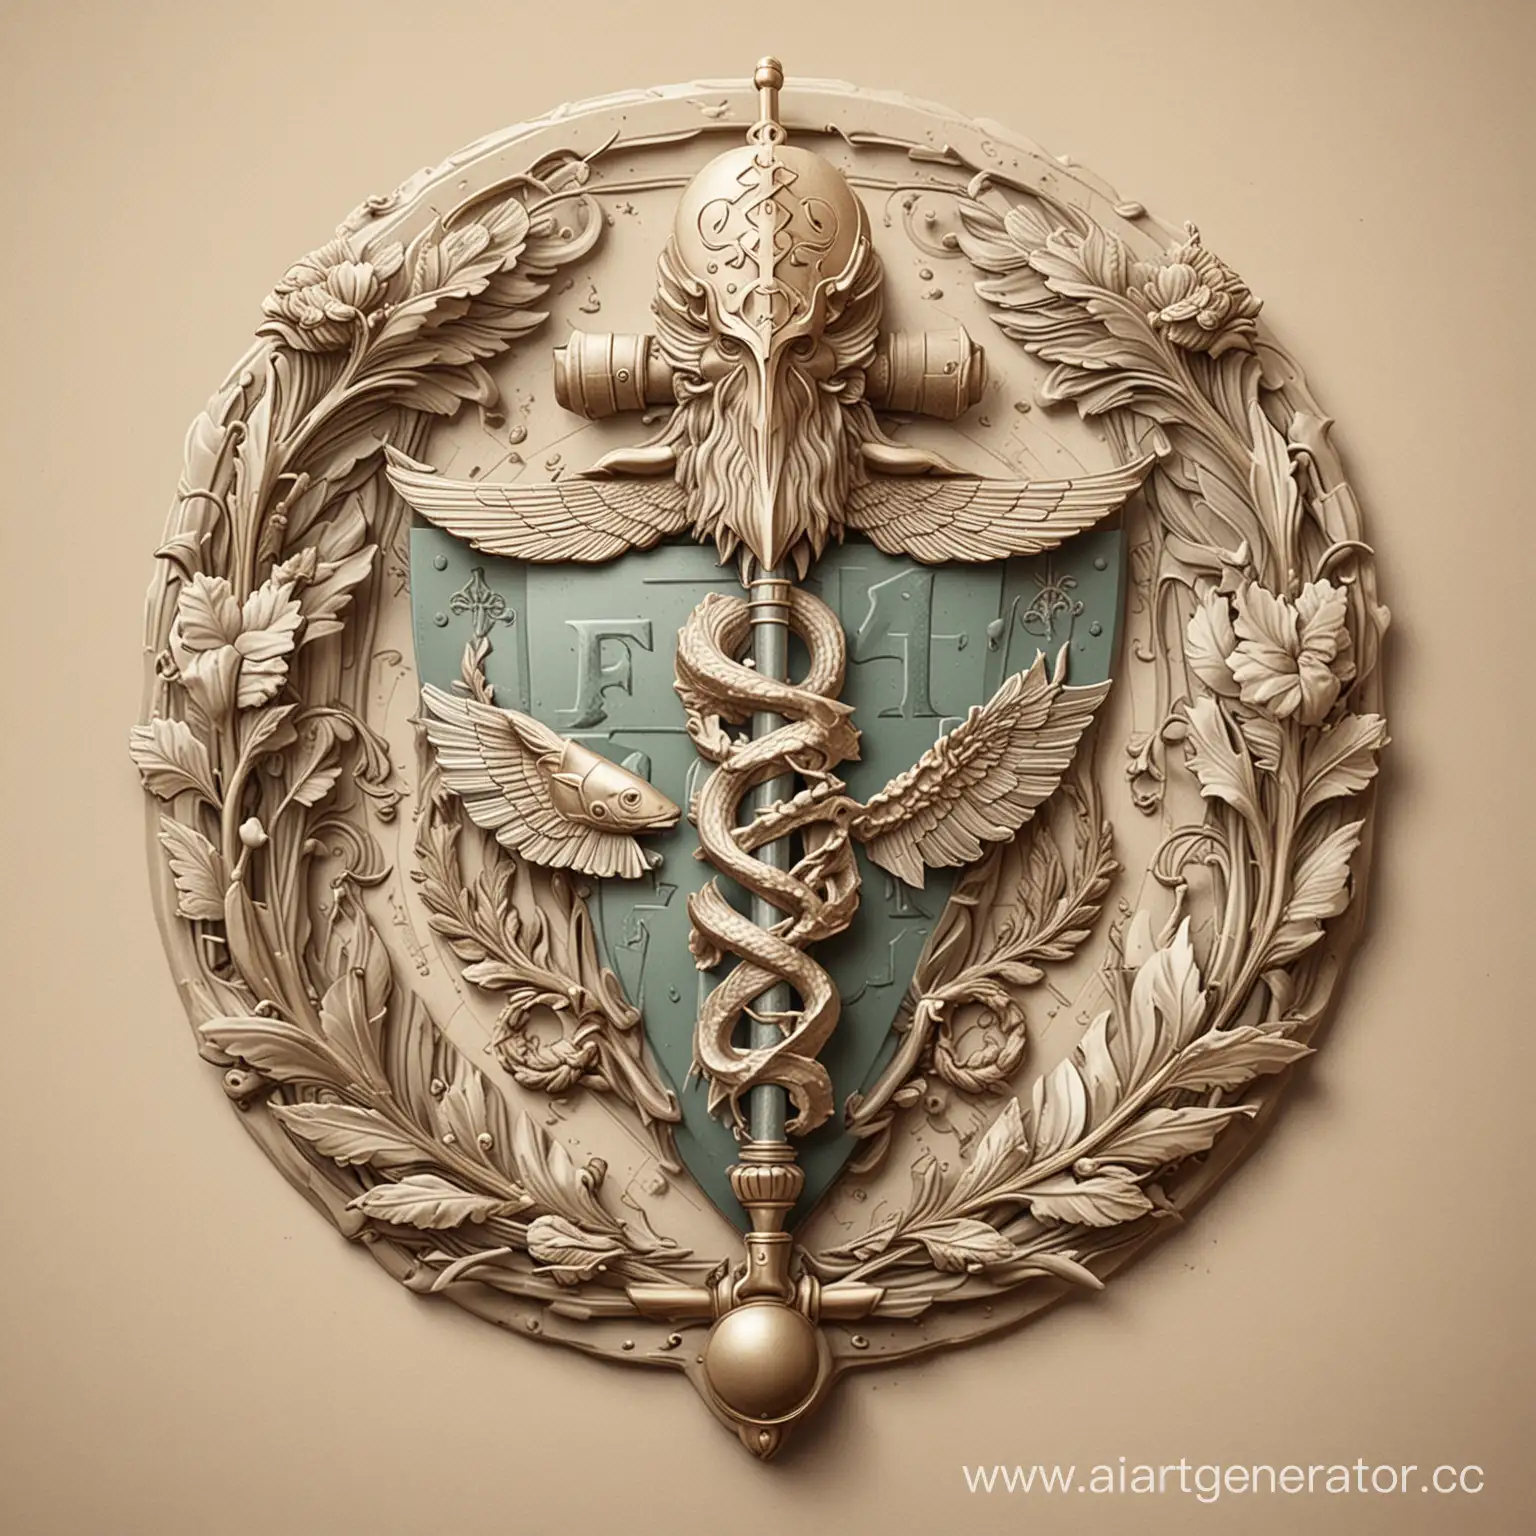 Modern-Minimalist-Family-Coat-of-Arms-with-Fish-and-Caduceus